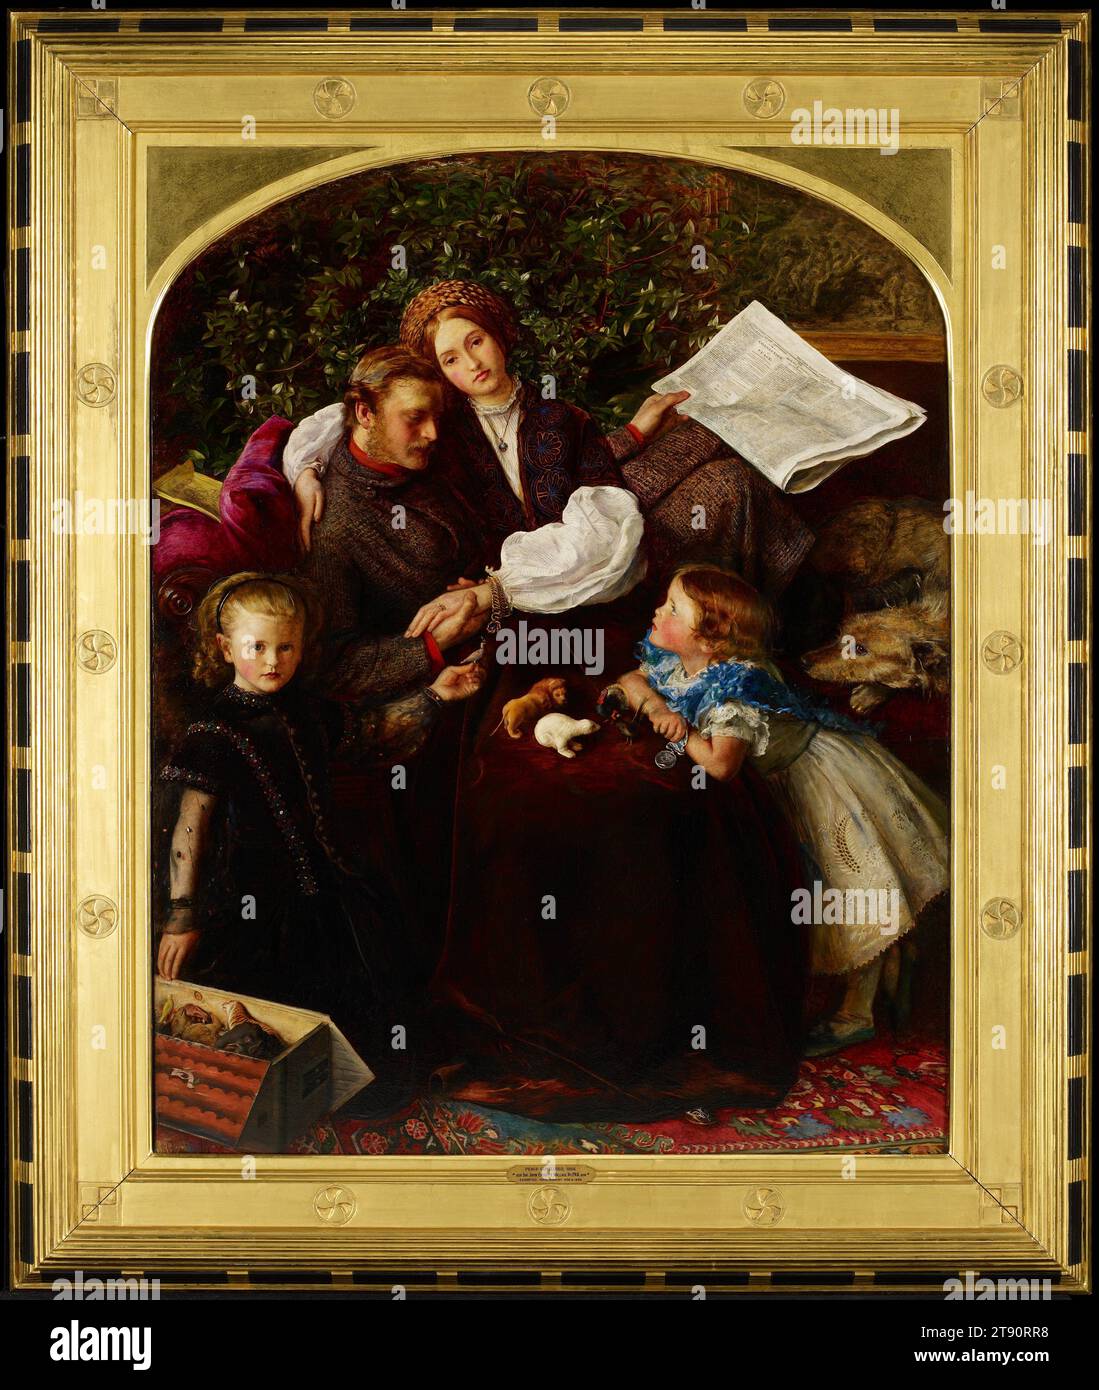 Peace Concluded, 1856, Sir John Everett Millais, British, 1829 - 1896, 46 x 36 in. (116.84 x 91.44 cm) (canvas)58 x 48 3/4 x 2 in. (147.32 x 123.83 x 5.08 cm) (outer frame), Oil on canvas, England, 19th century, At first glance this appears to be a family portrait complete with realistic details of middle-class English decor. In fact, it is a staged scene of domestic harmony, celebrating the end of the Crimean War. The father, a wounded officer, holds a copy of the Times announcing the war's end. One daughter clasps his combat medal. On the mother's lap, four animals from the toy Noah's Ark Stock Photo